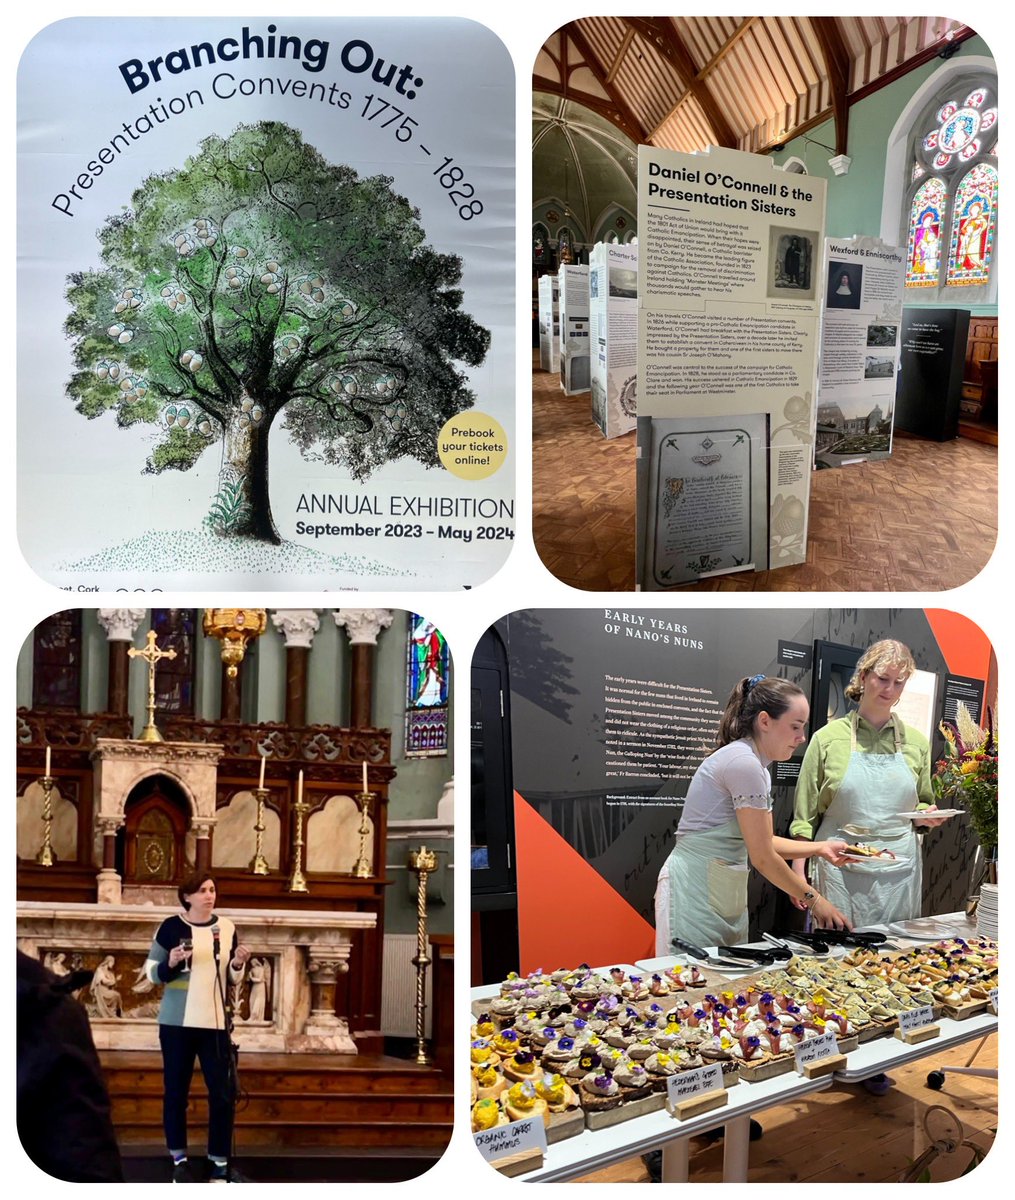 Great launch of ‘Branching Out’ #exhibition in #cork last night. We’ve an excellent website, branchingout.ie with all sorts of #nuntastic material too. #museums #exhibition #history